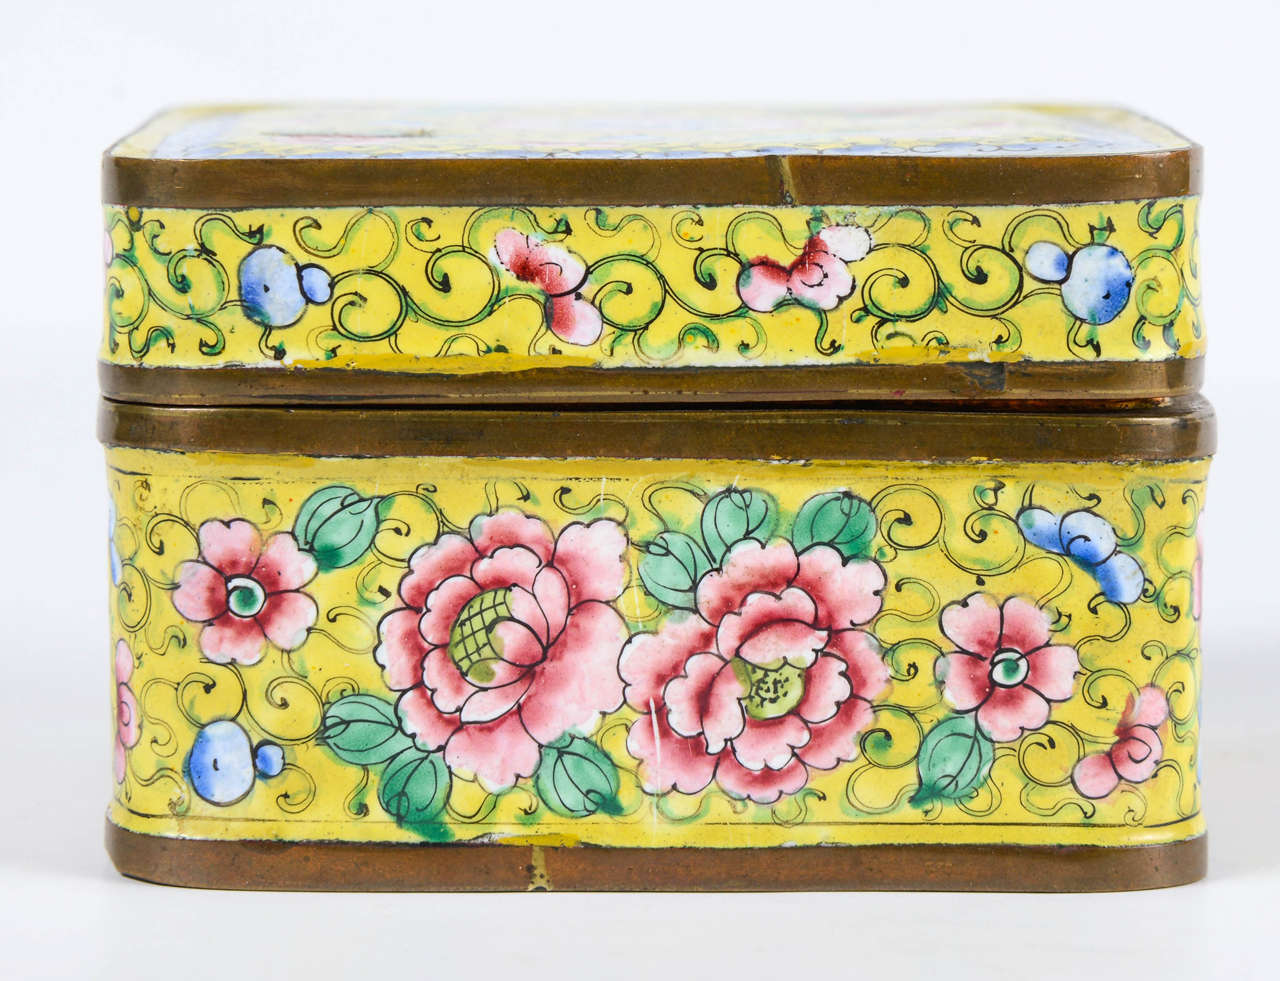 Yellow enamel Canton box with a background decor of flowers and foliage in polychrome scrolls. The interior is in blue enamel
China - 19th century
Height 5.5 cm – Width/Depth 8.5 cm